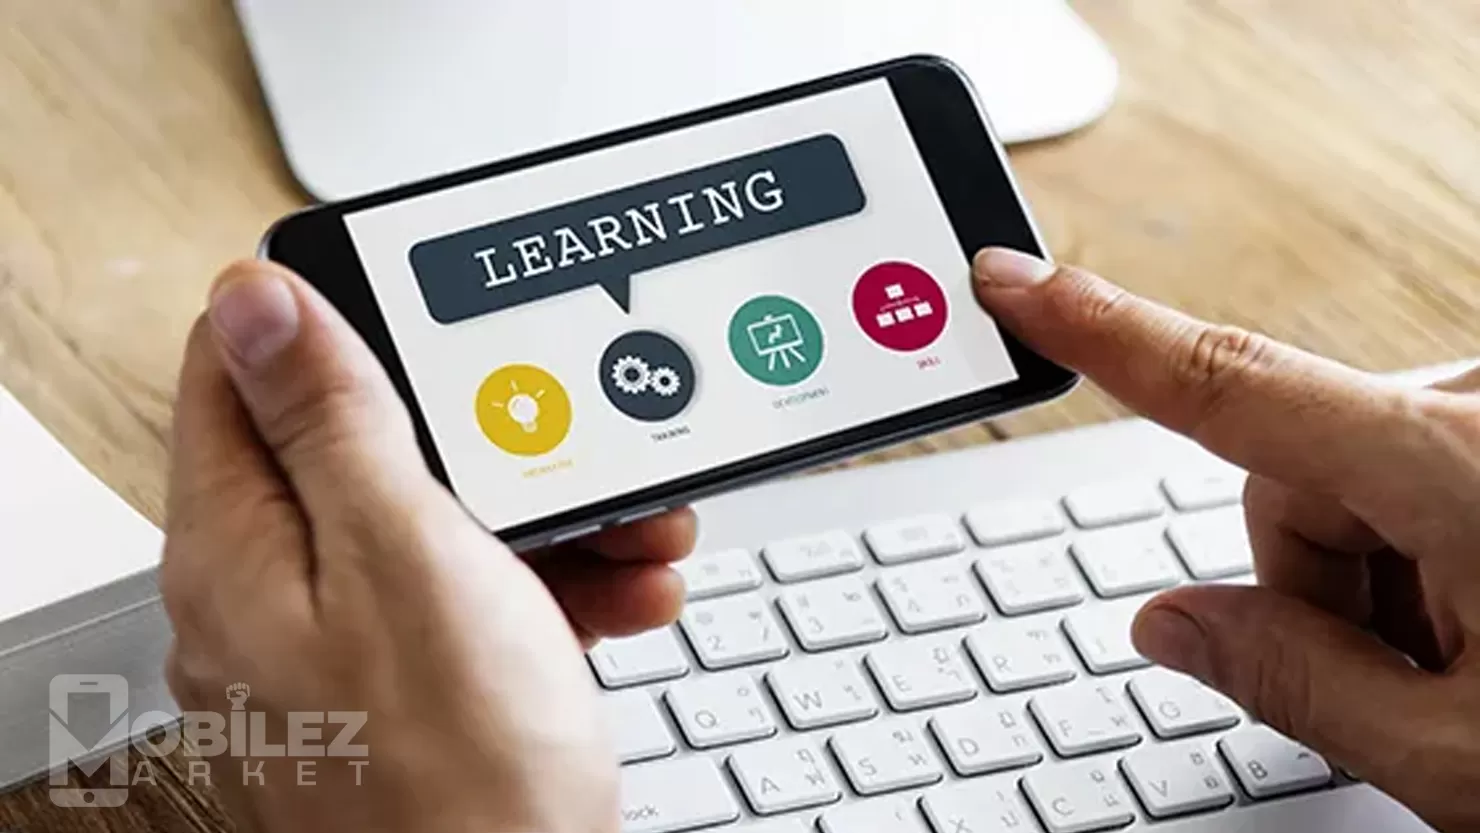 Mobile Learning | How Smartphones Are Changing Education